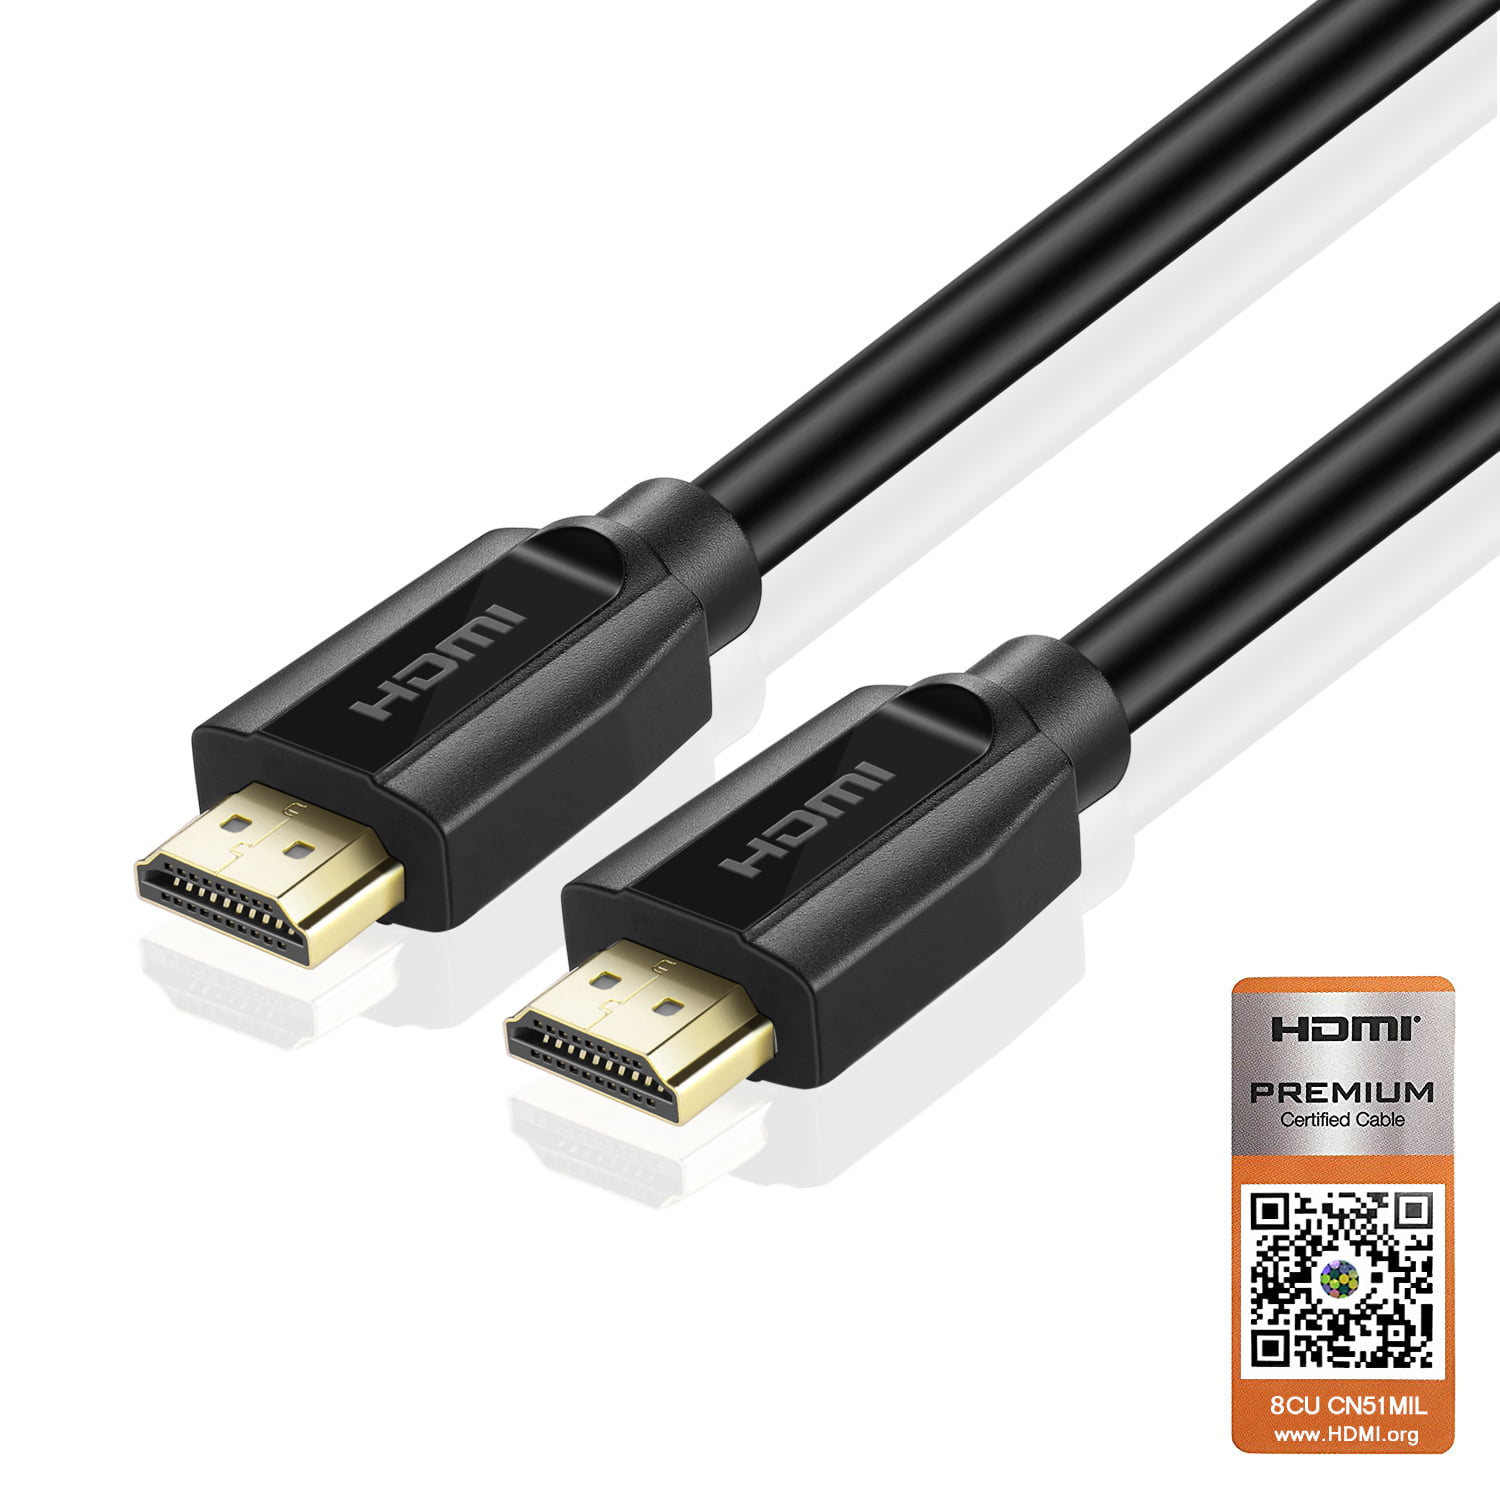 Premium 4K HDMI cable V2.0 high speed 3D gold plated Extension Lead For PS4 HDTV 